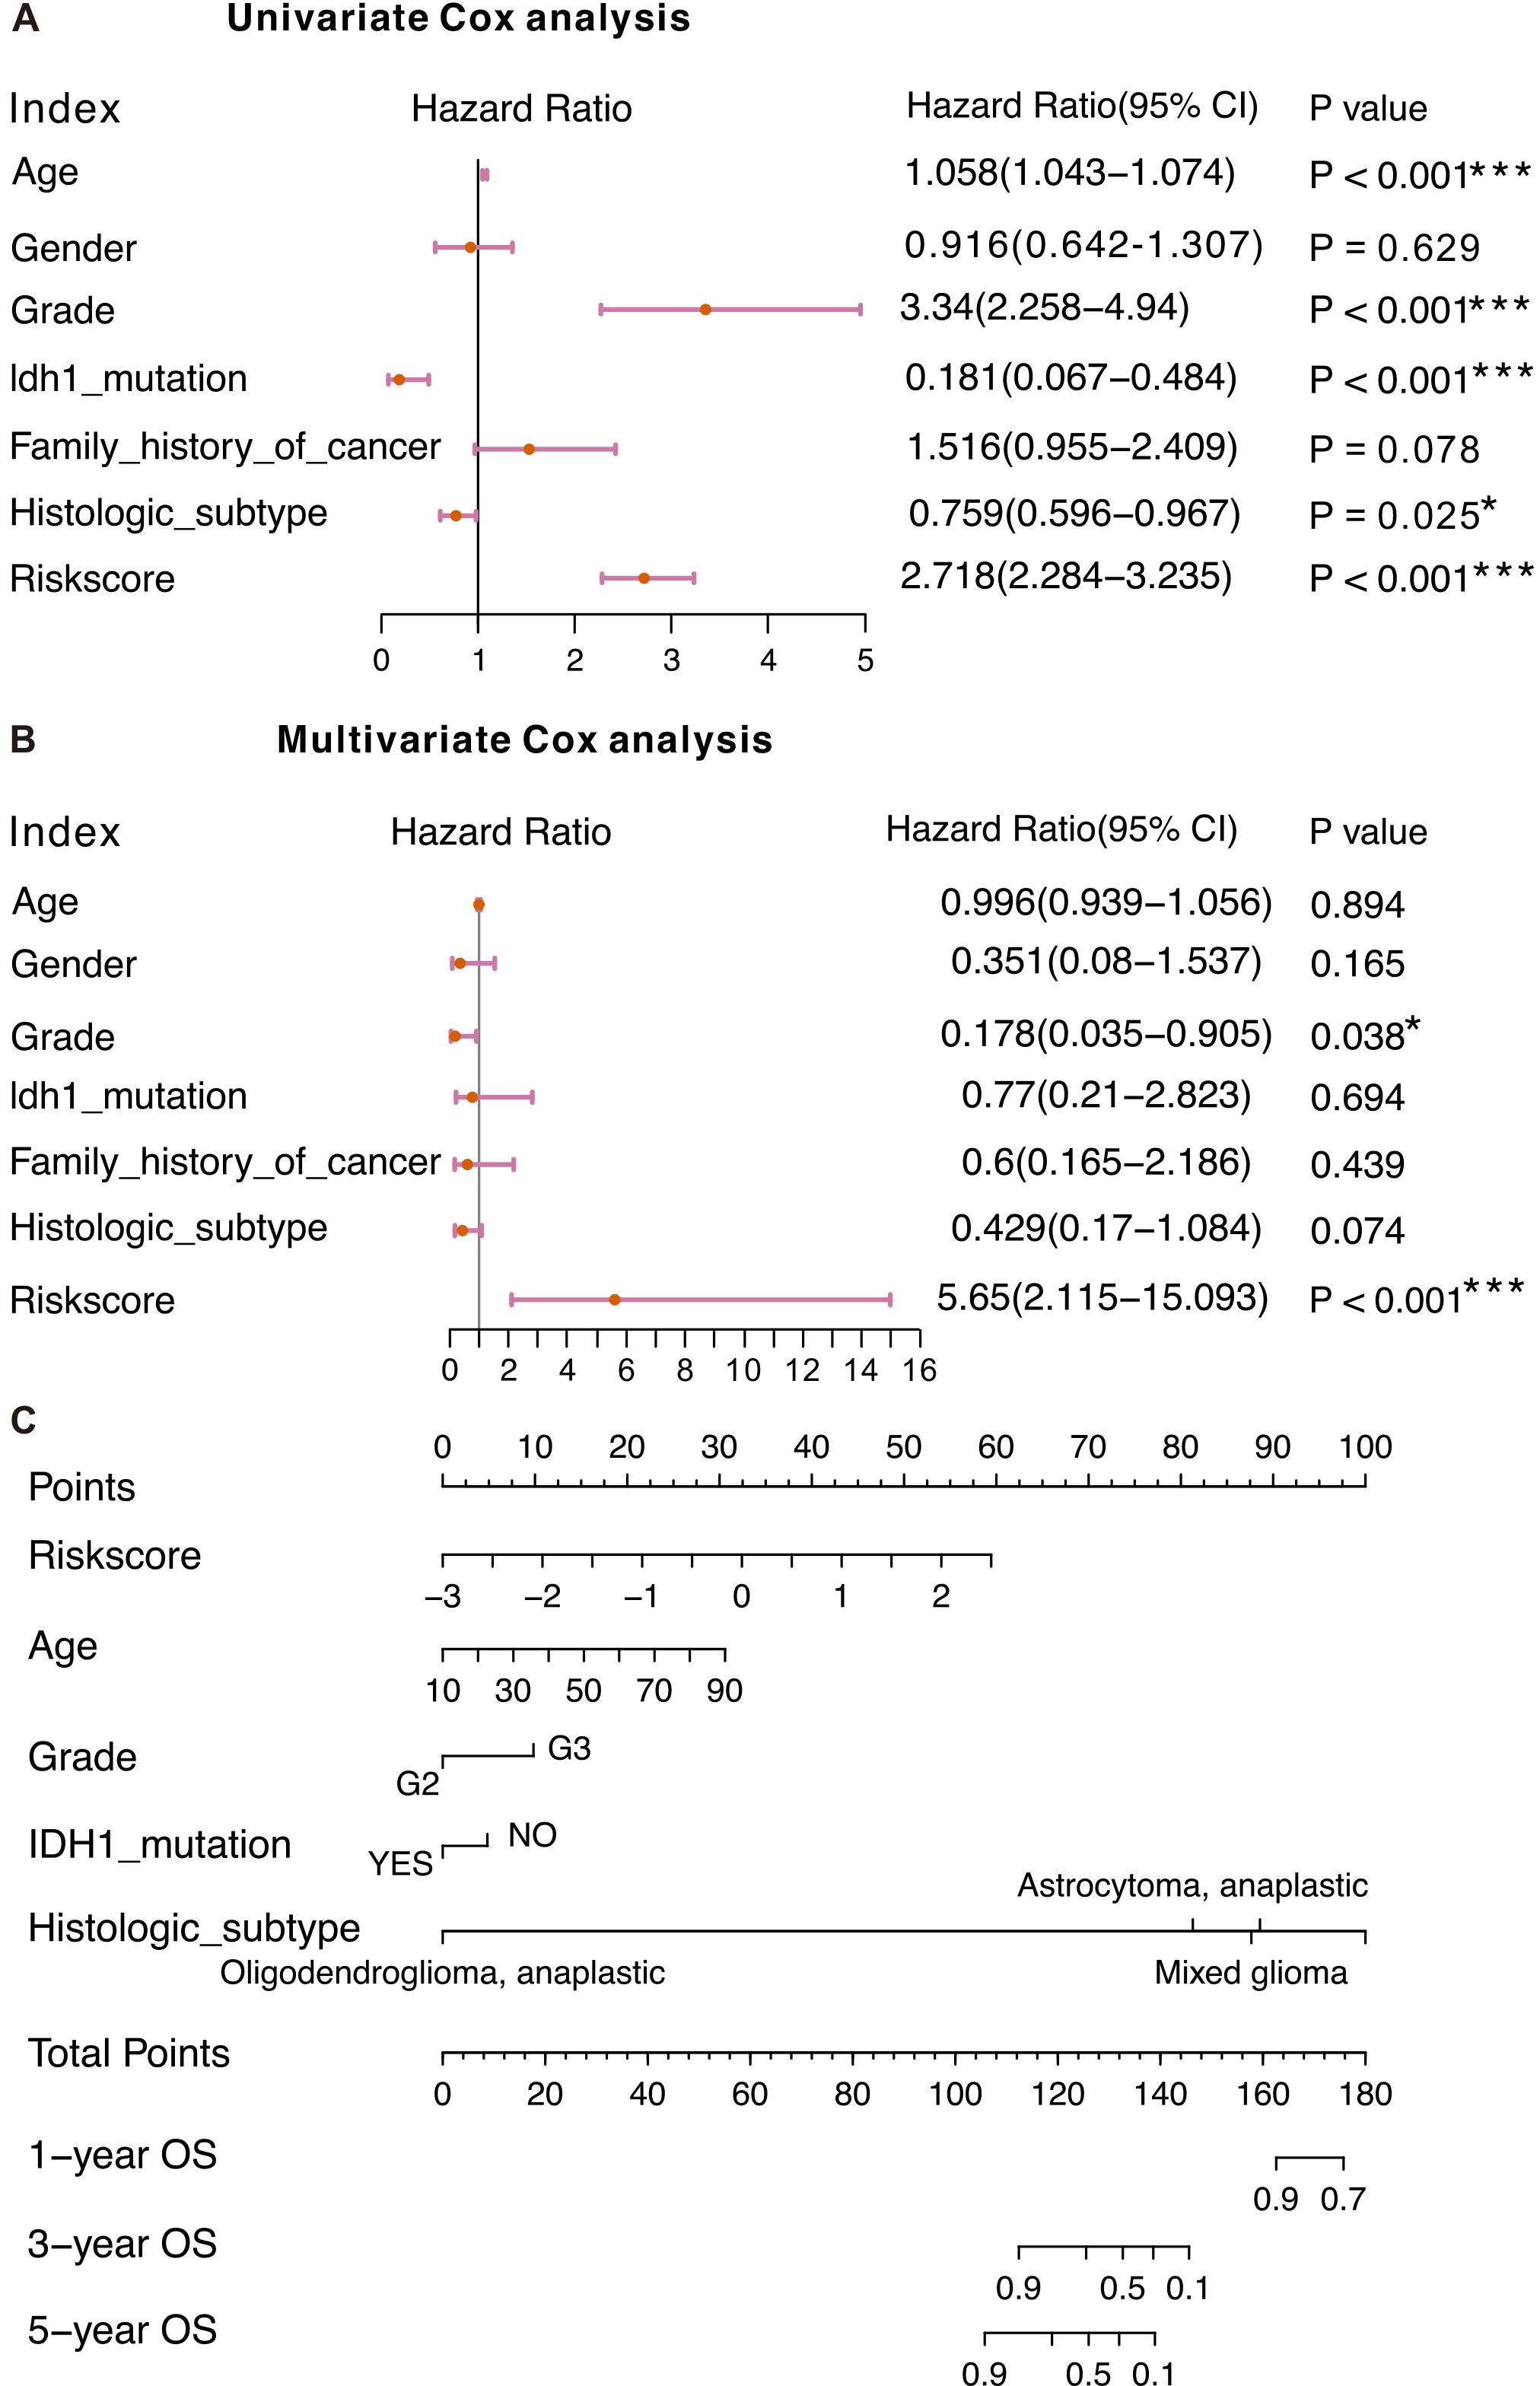 The Cox regression (A-B) of risk scores and clinical characteristics. ****P < 0.0001, ***P < 0.001, **P < 0.01, *P < 0.05. (C) The nomogram for OS prediction, which consisted of age, grade, IDH1 mutation status, histologic subtype and the riskscore.